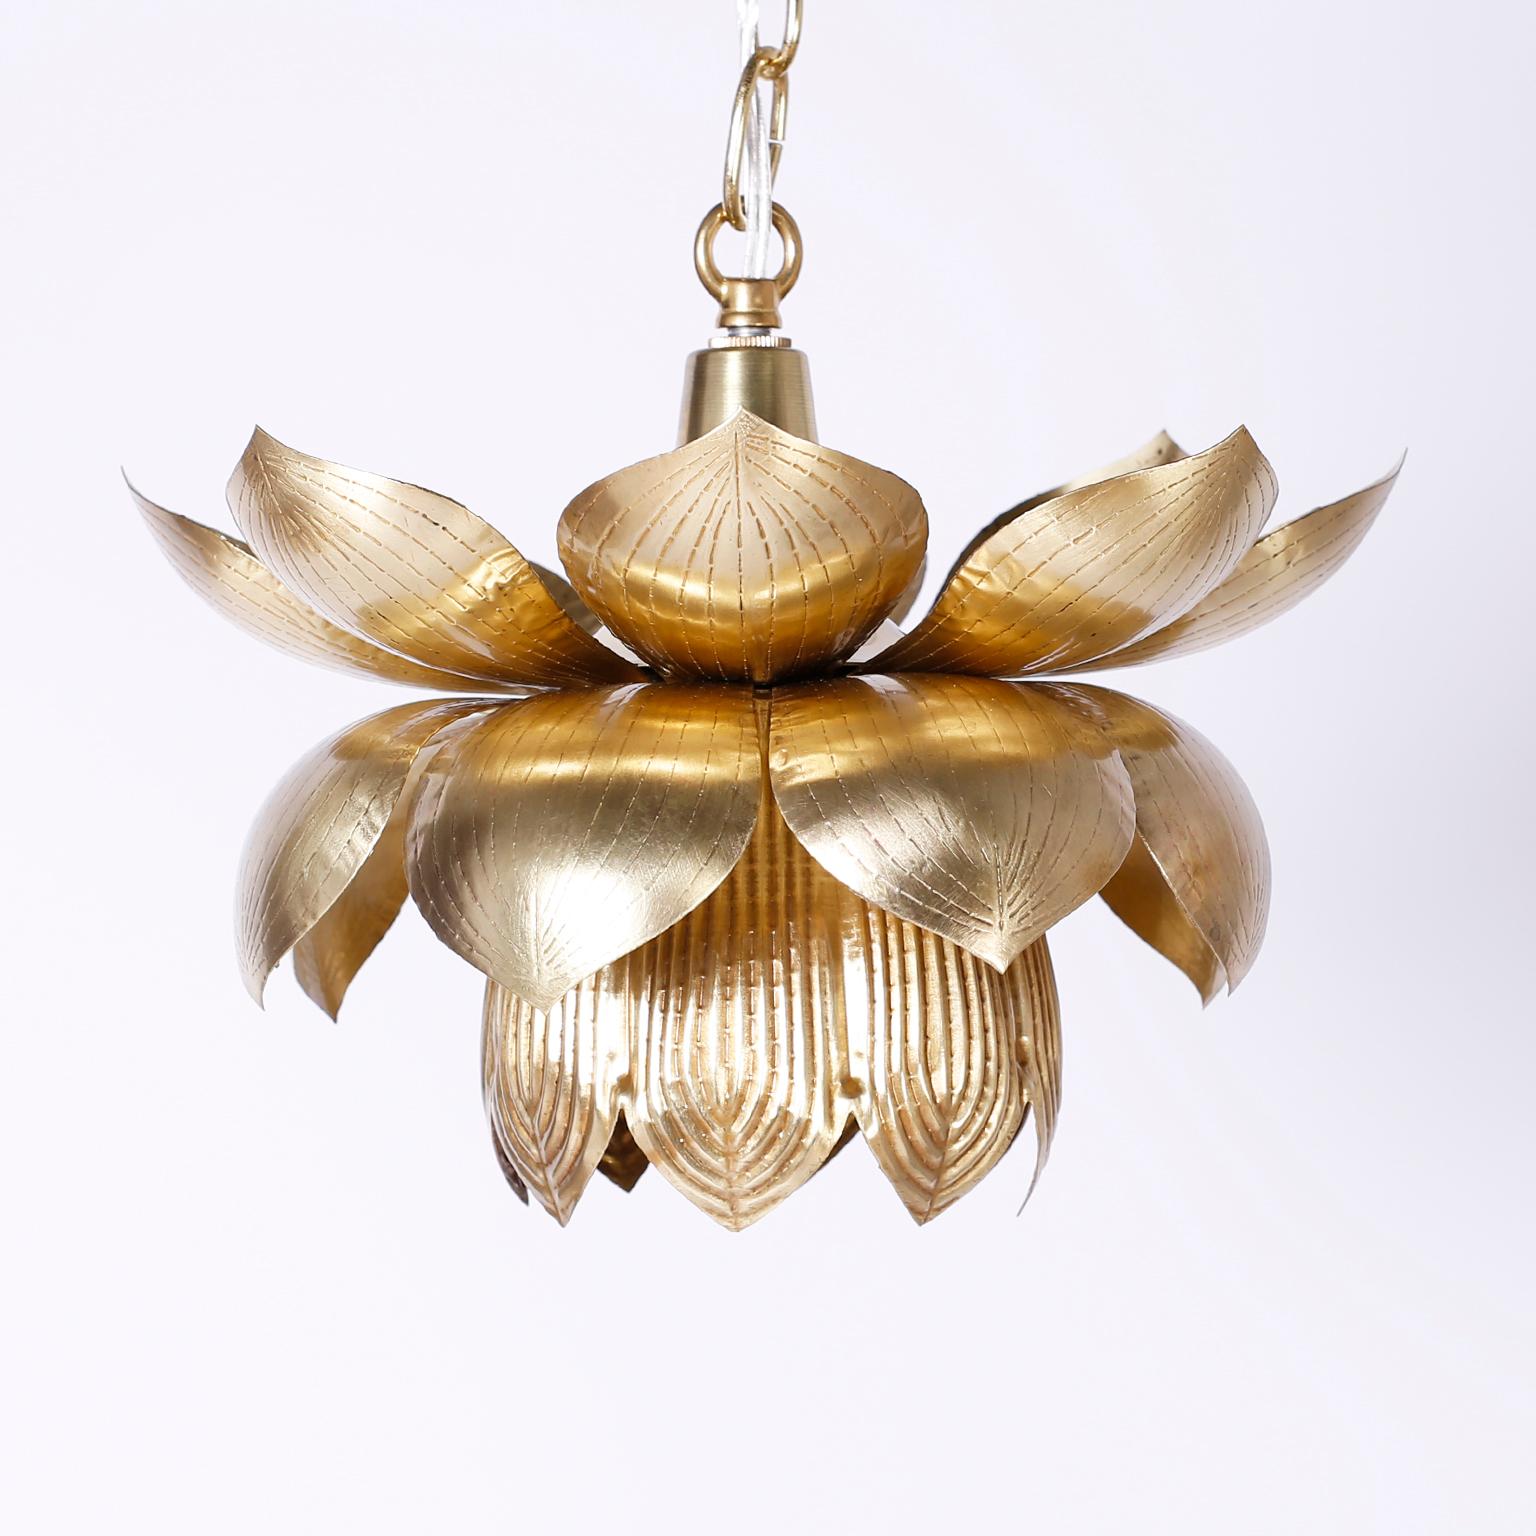 Chic pair of midcentury lotus pendants or light fixtures with an exotic ambiance, crafted in brass and hand polished and lacquered for easy care. Probably Feldman with a larger one also available. Priced Individually.